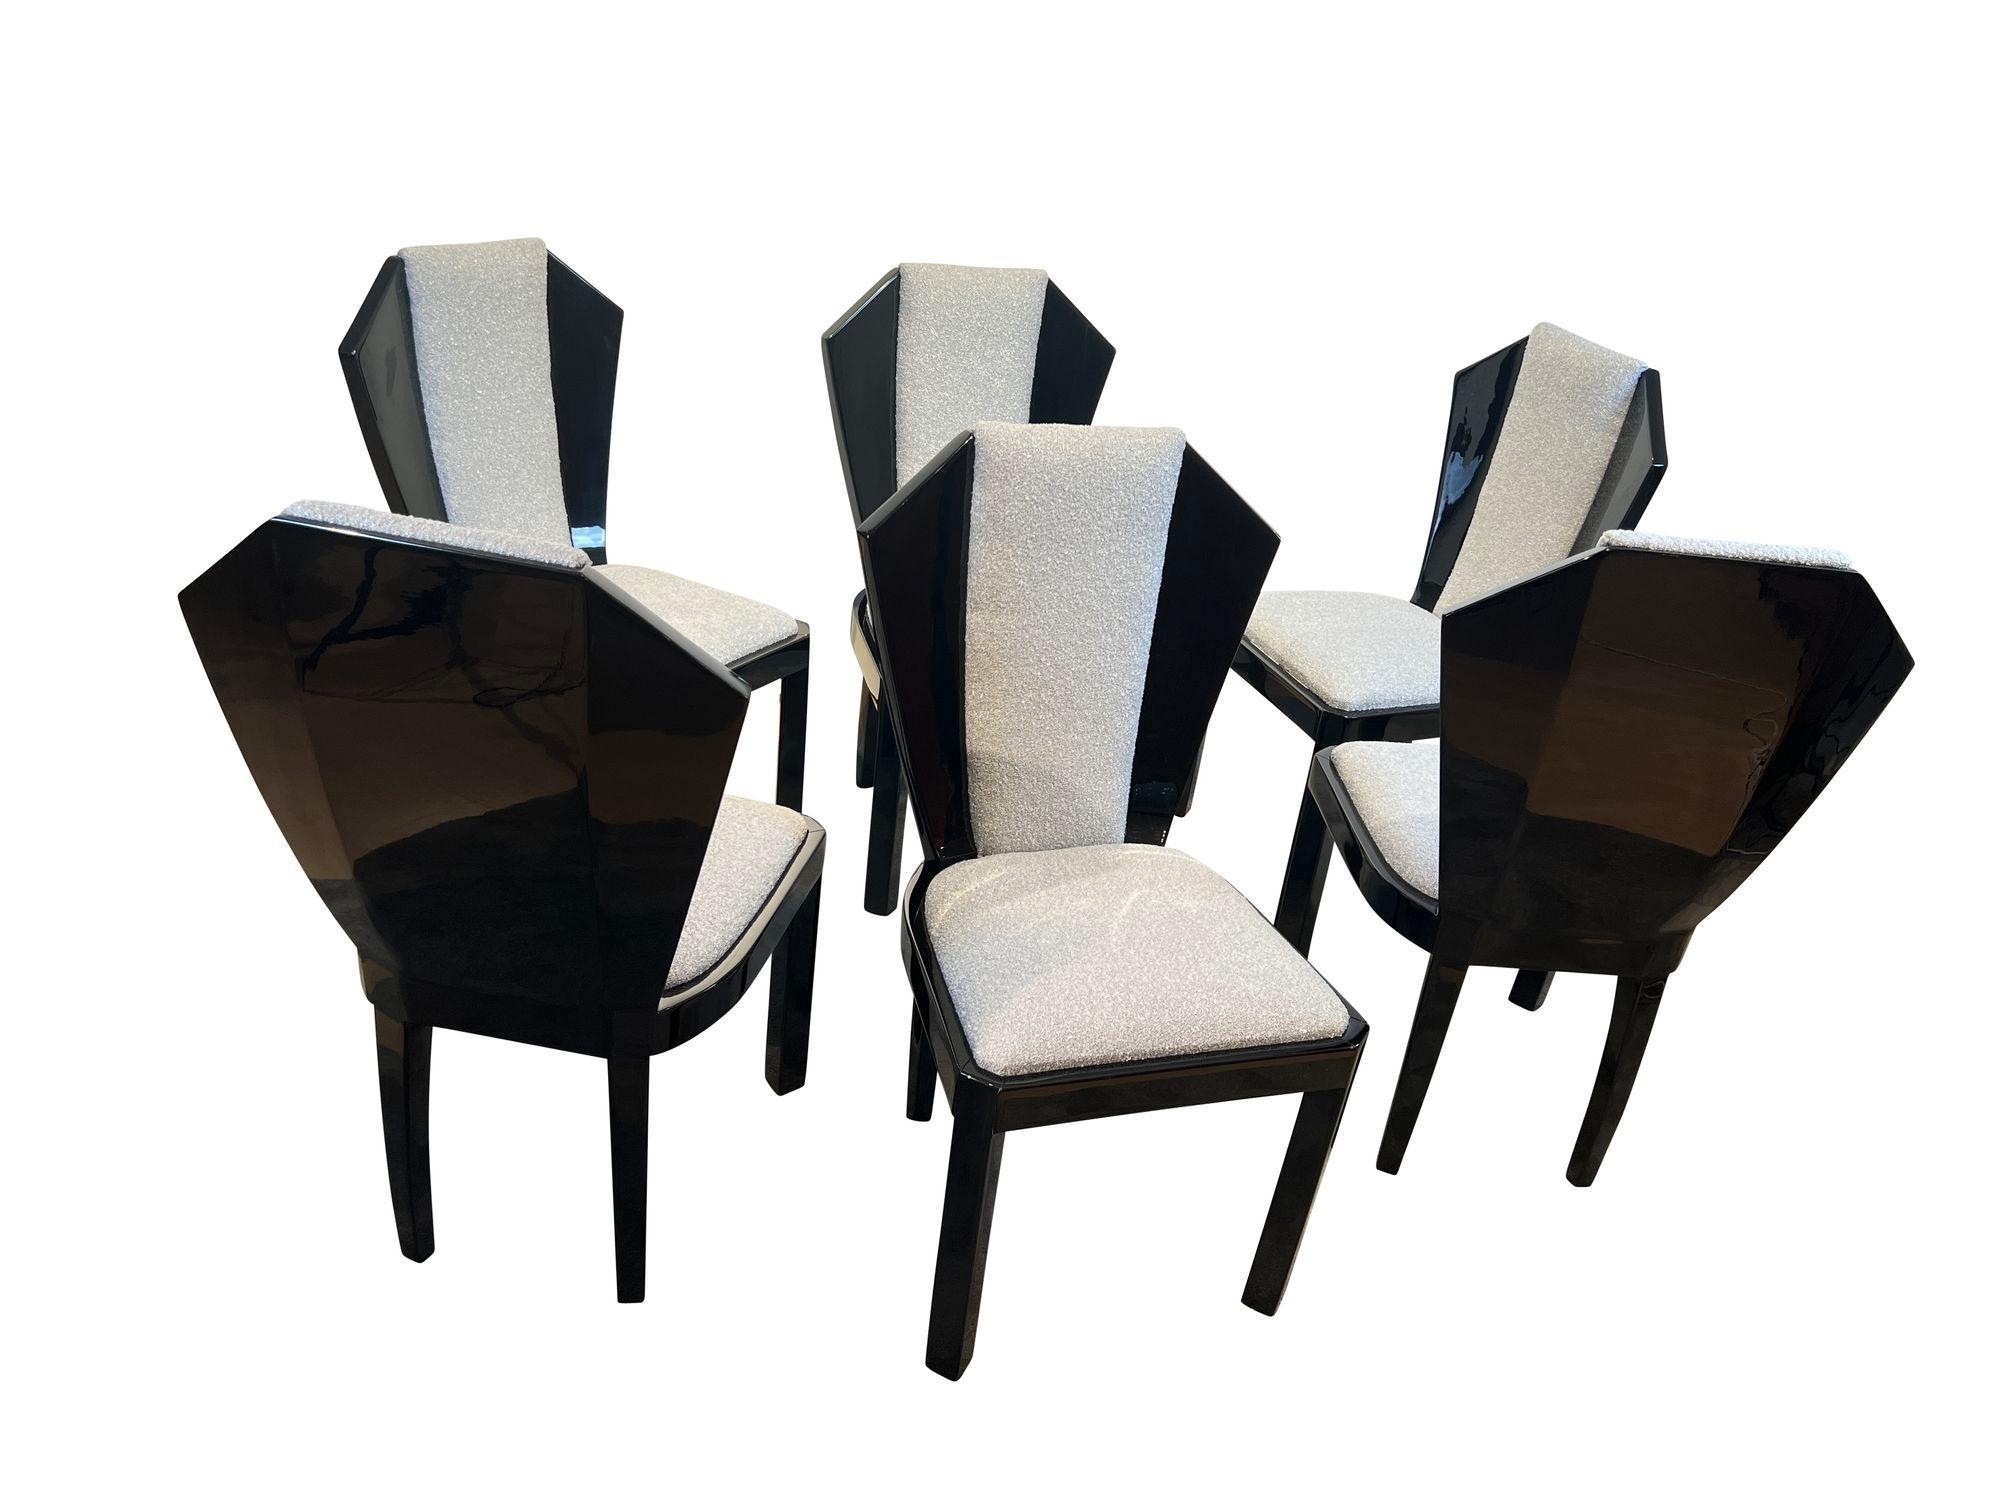 Set of Six Art Deco Dining Chairs, Black Lacquer and Grey Fabric, France circa 1930
Wonderful and rare fan-shaped design with a conical and upholstered backrest. The walnut and beech wood underneath has been relacquered and high-gloss polished.
The